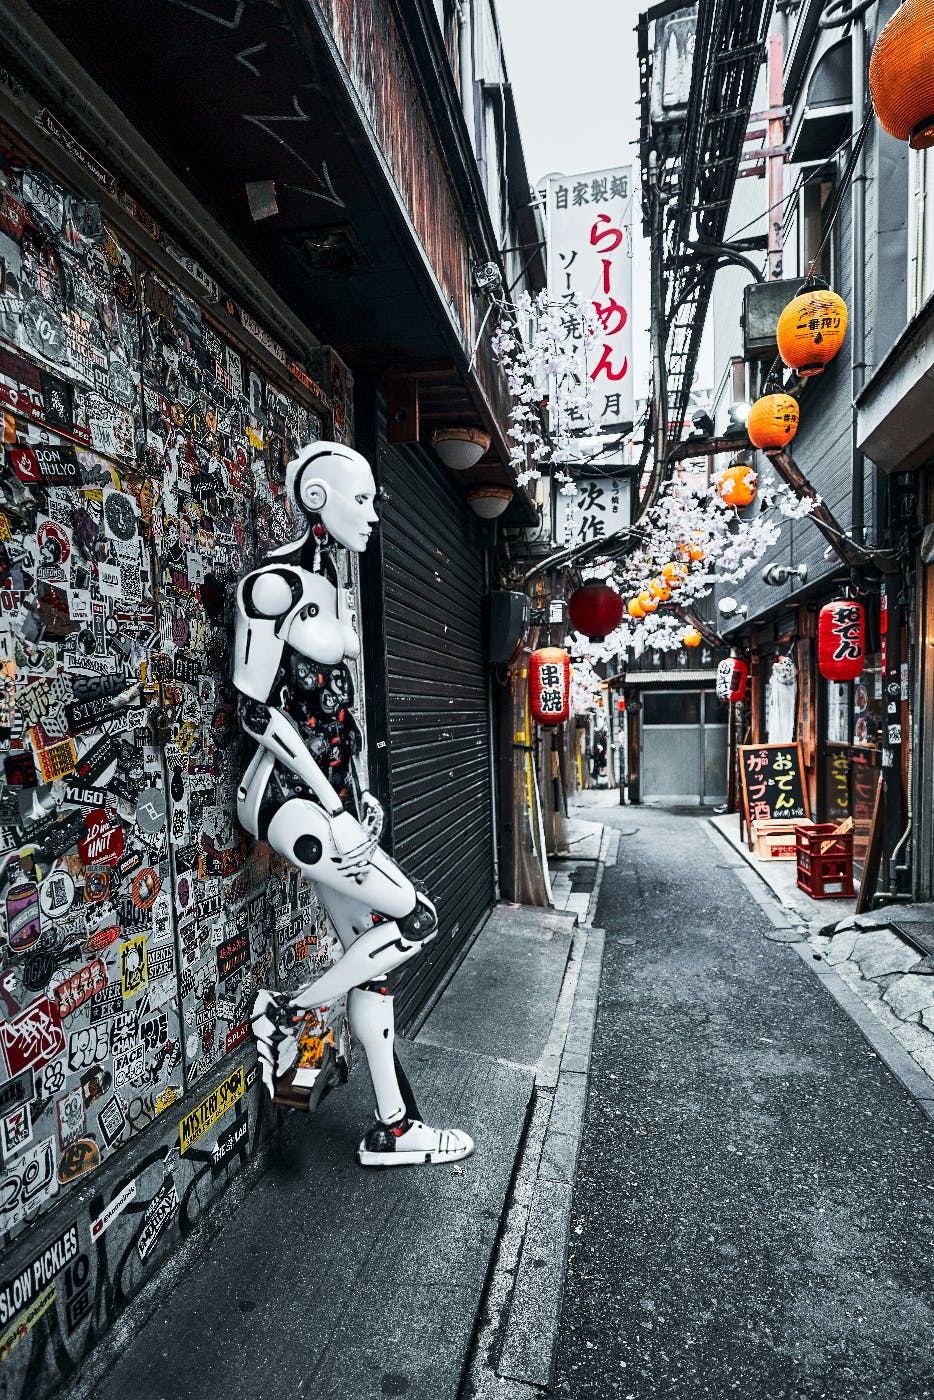 a robot leaning against a wall in an alley